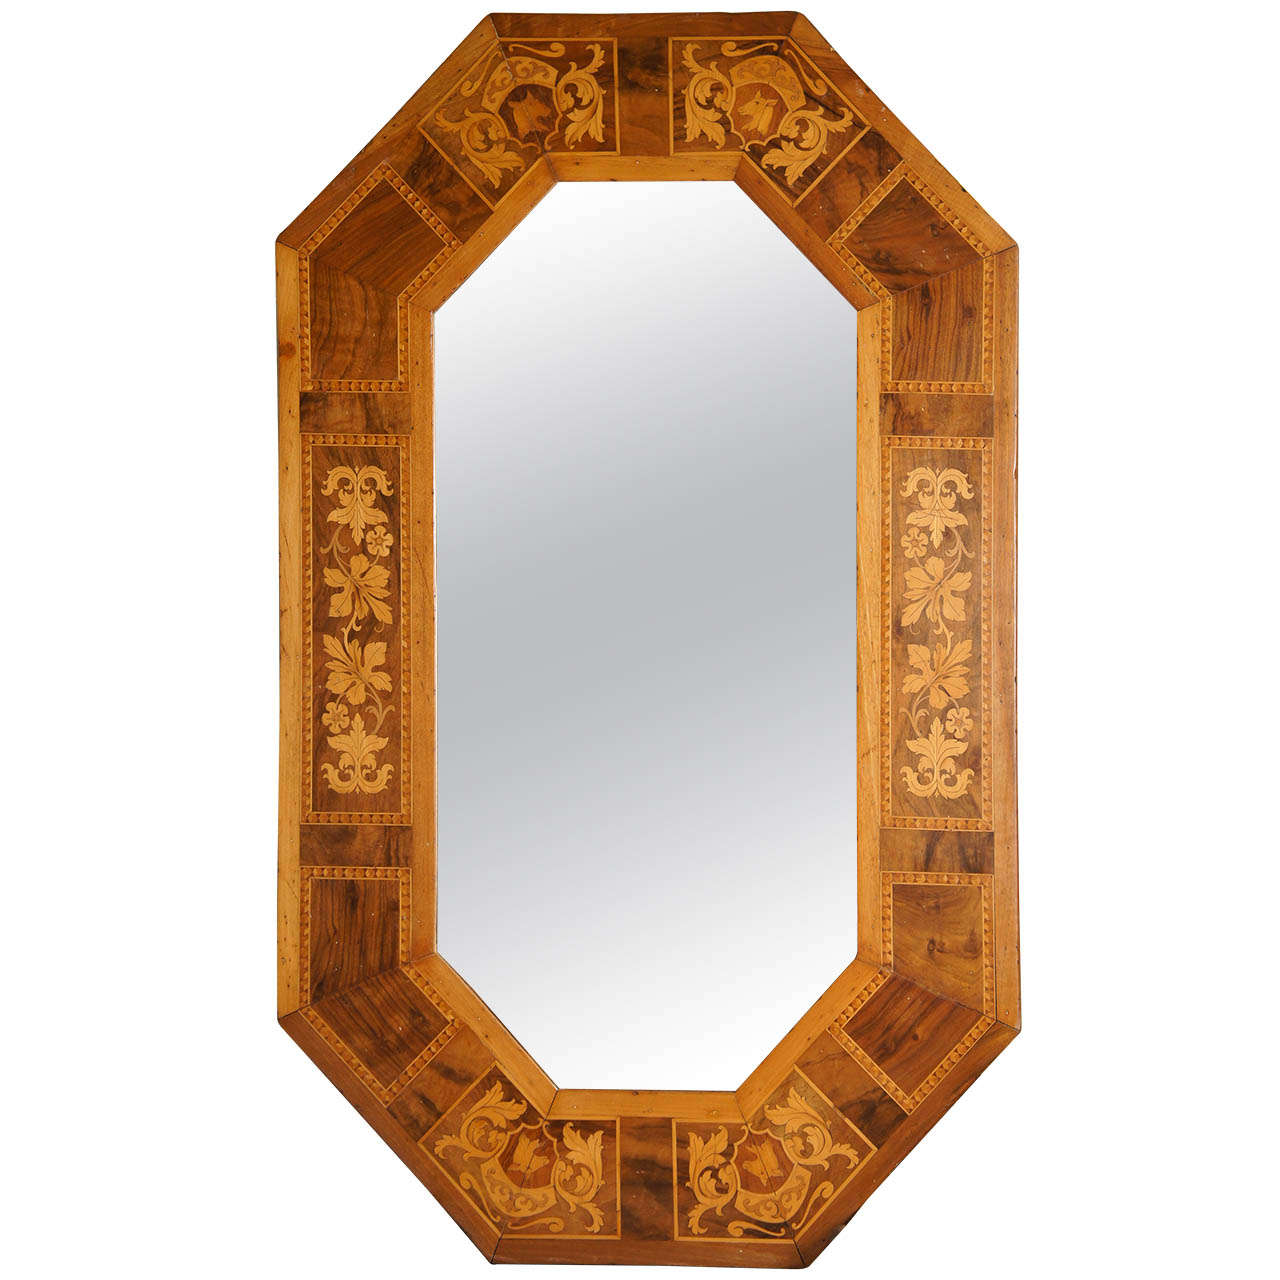 Late 19th Century Continental Walnut and Fruitwood Mirror